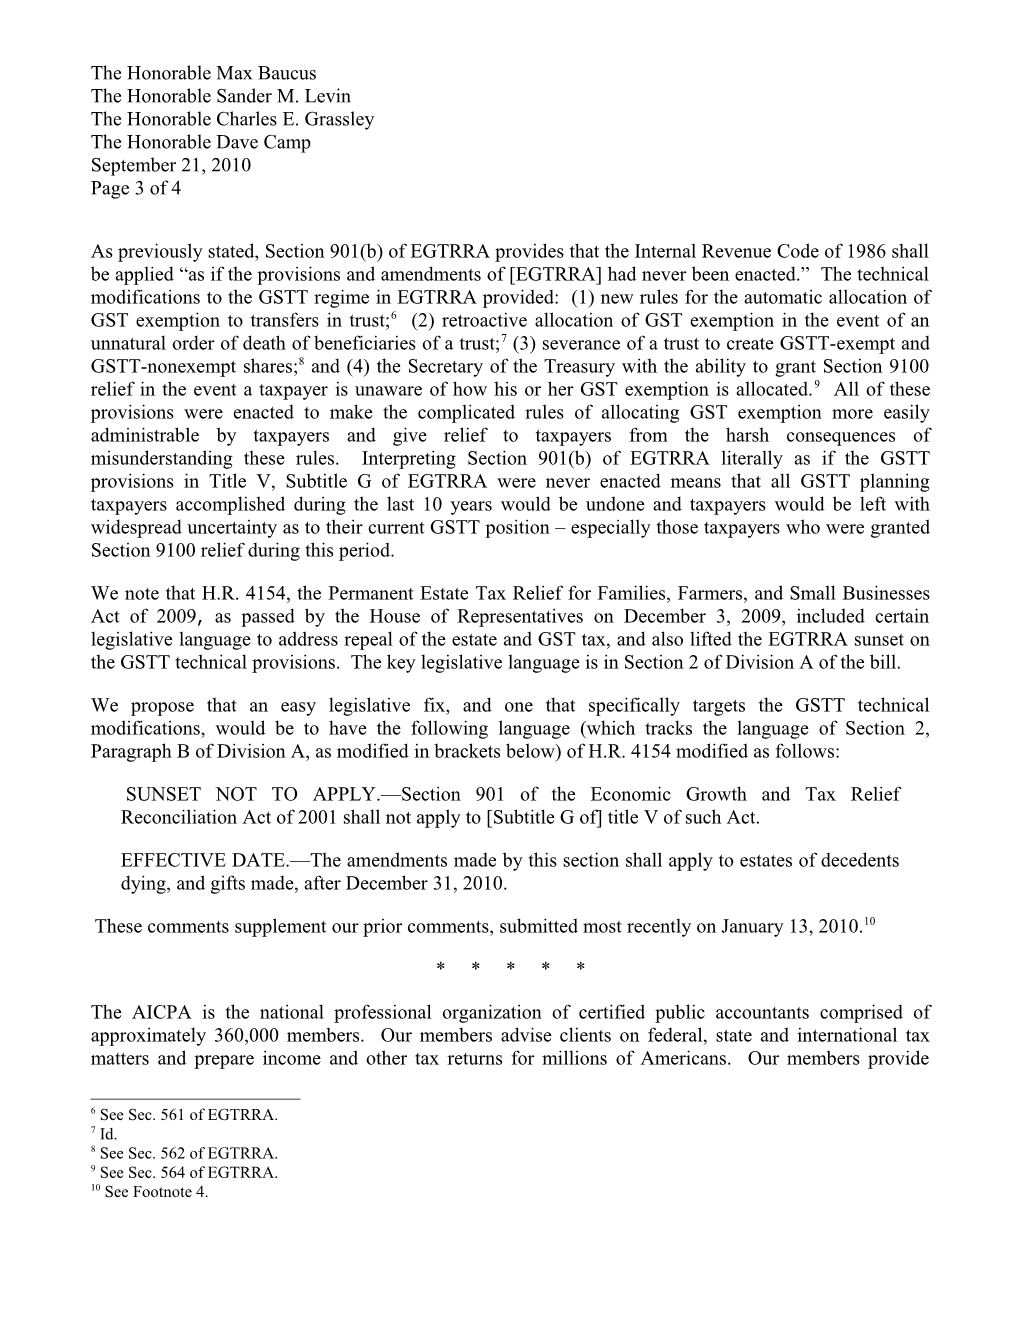 AICPA Letter to Congress on Making Permanent GSTT Technical Modifications from EGTRRA 2001